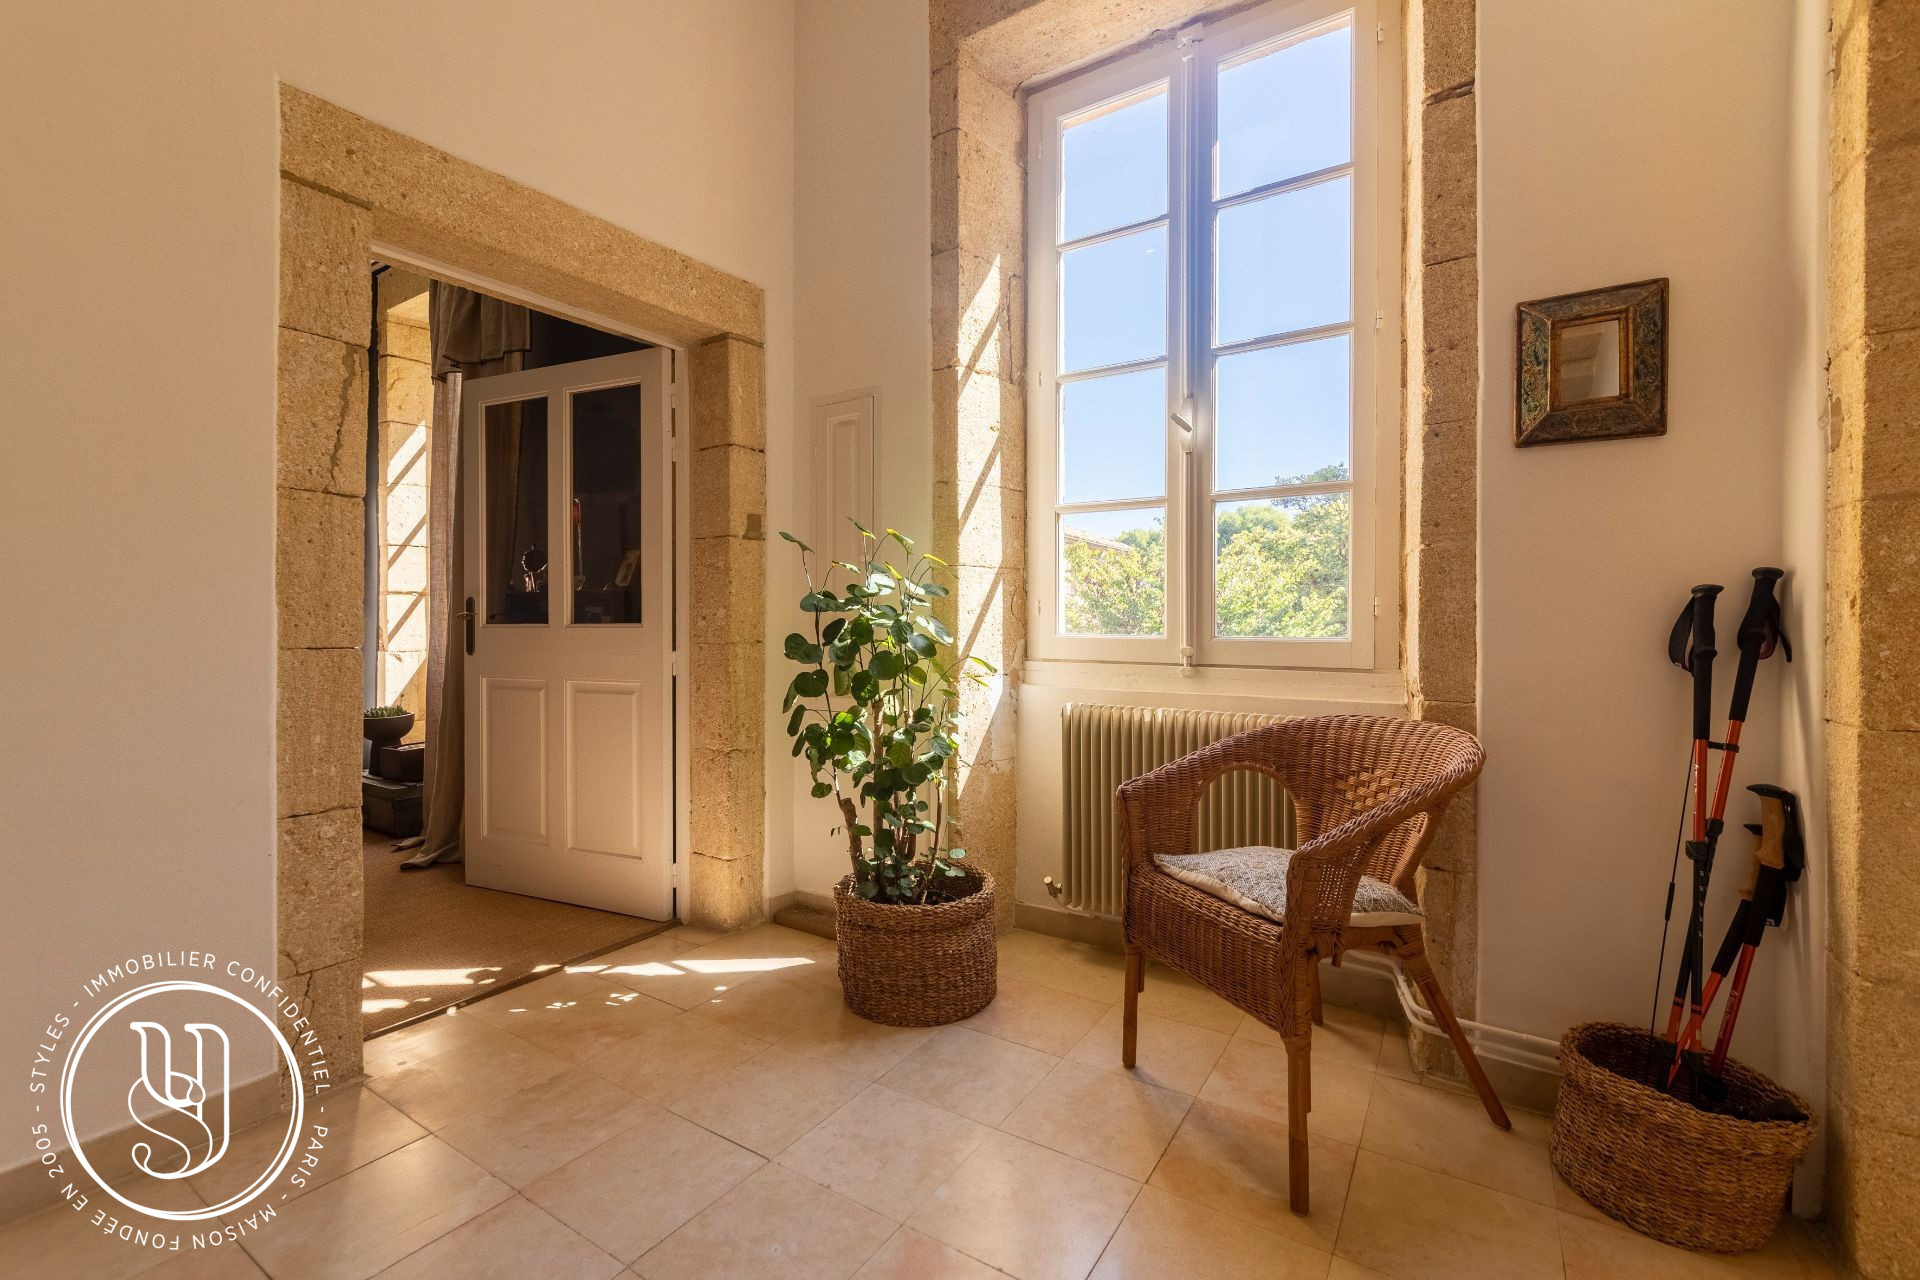 Uzes - surroundings, sold by S T Y LE S, a beautiful, refined and ele - image 13